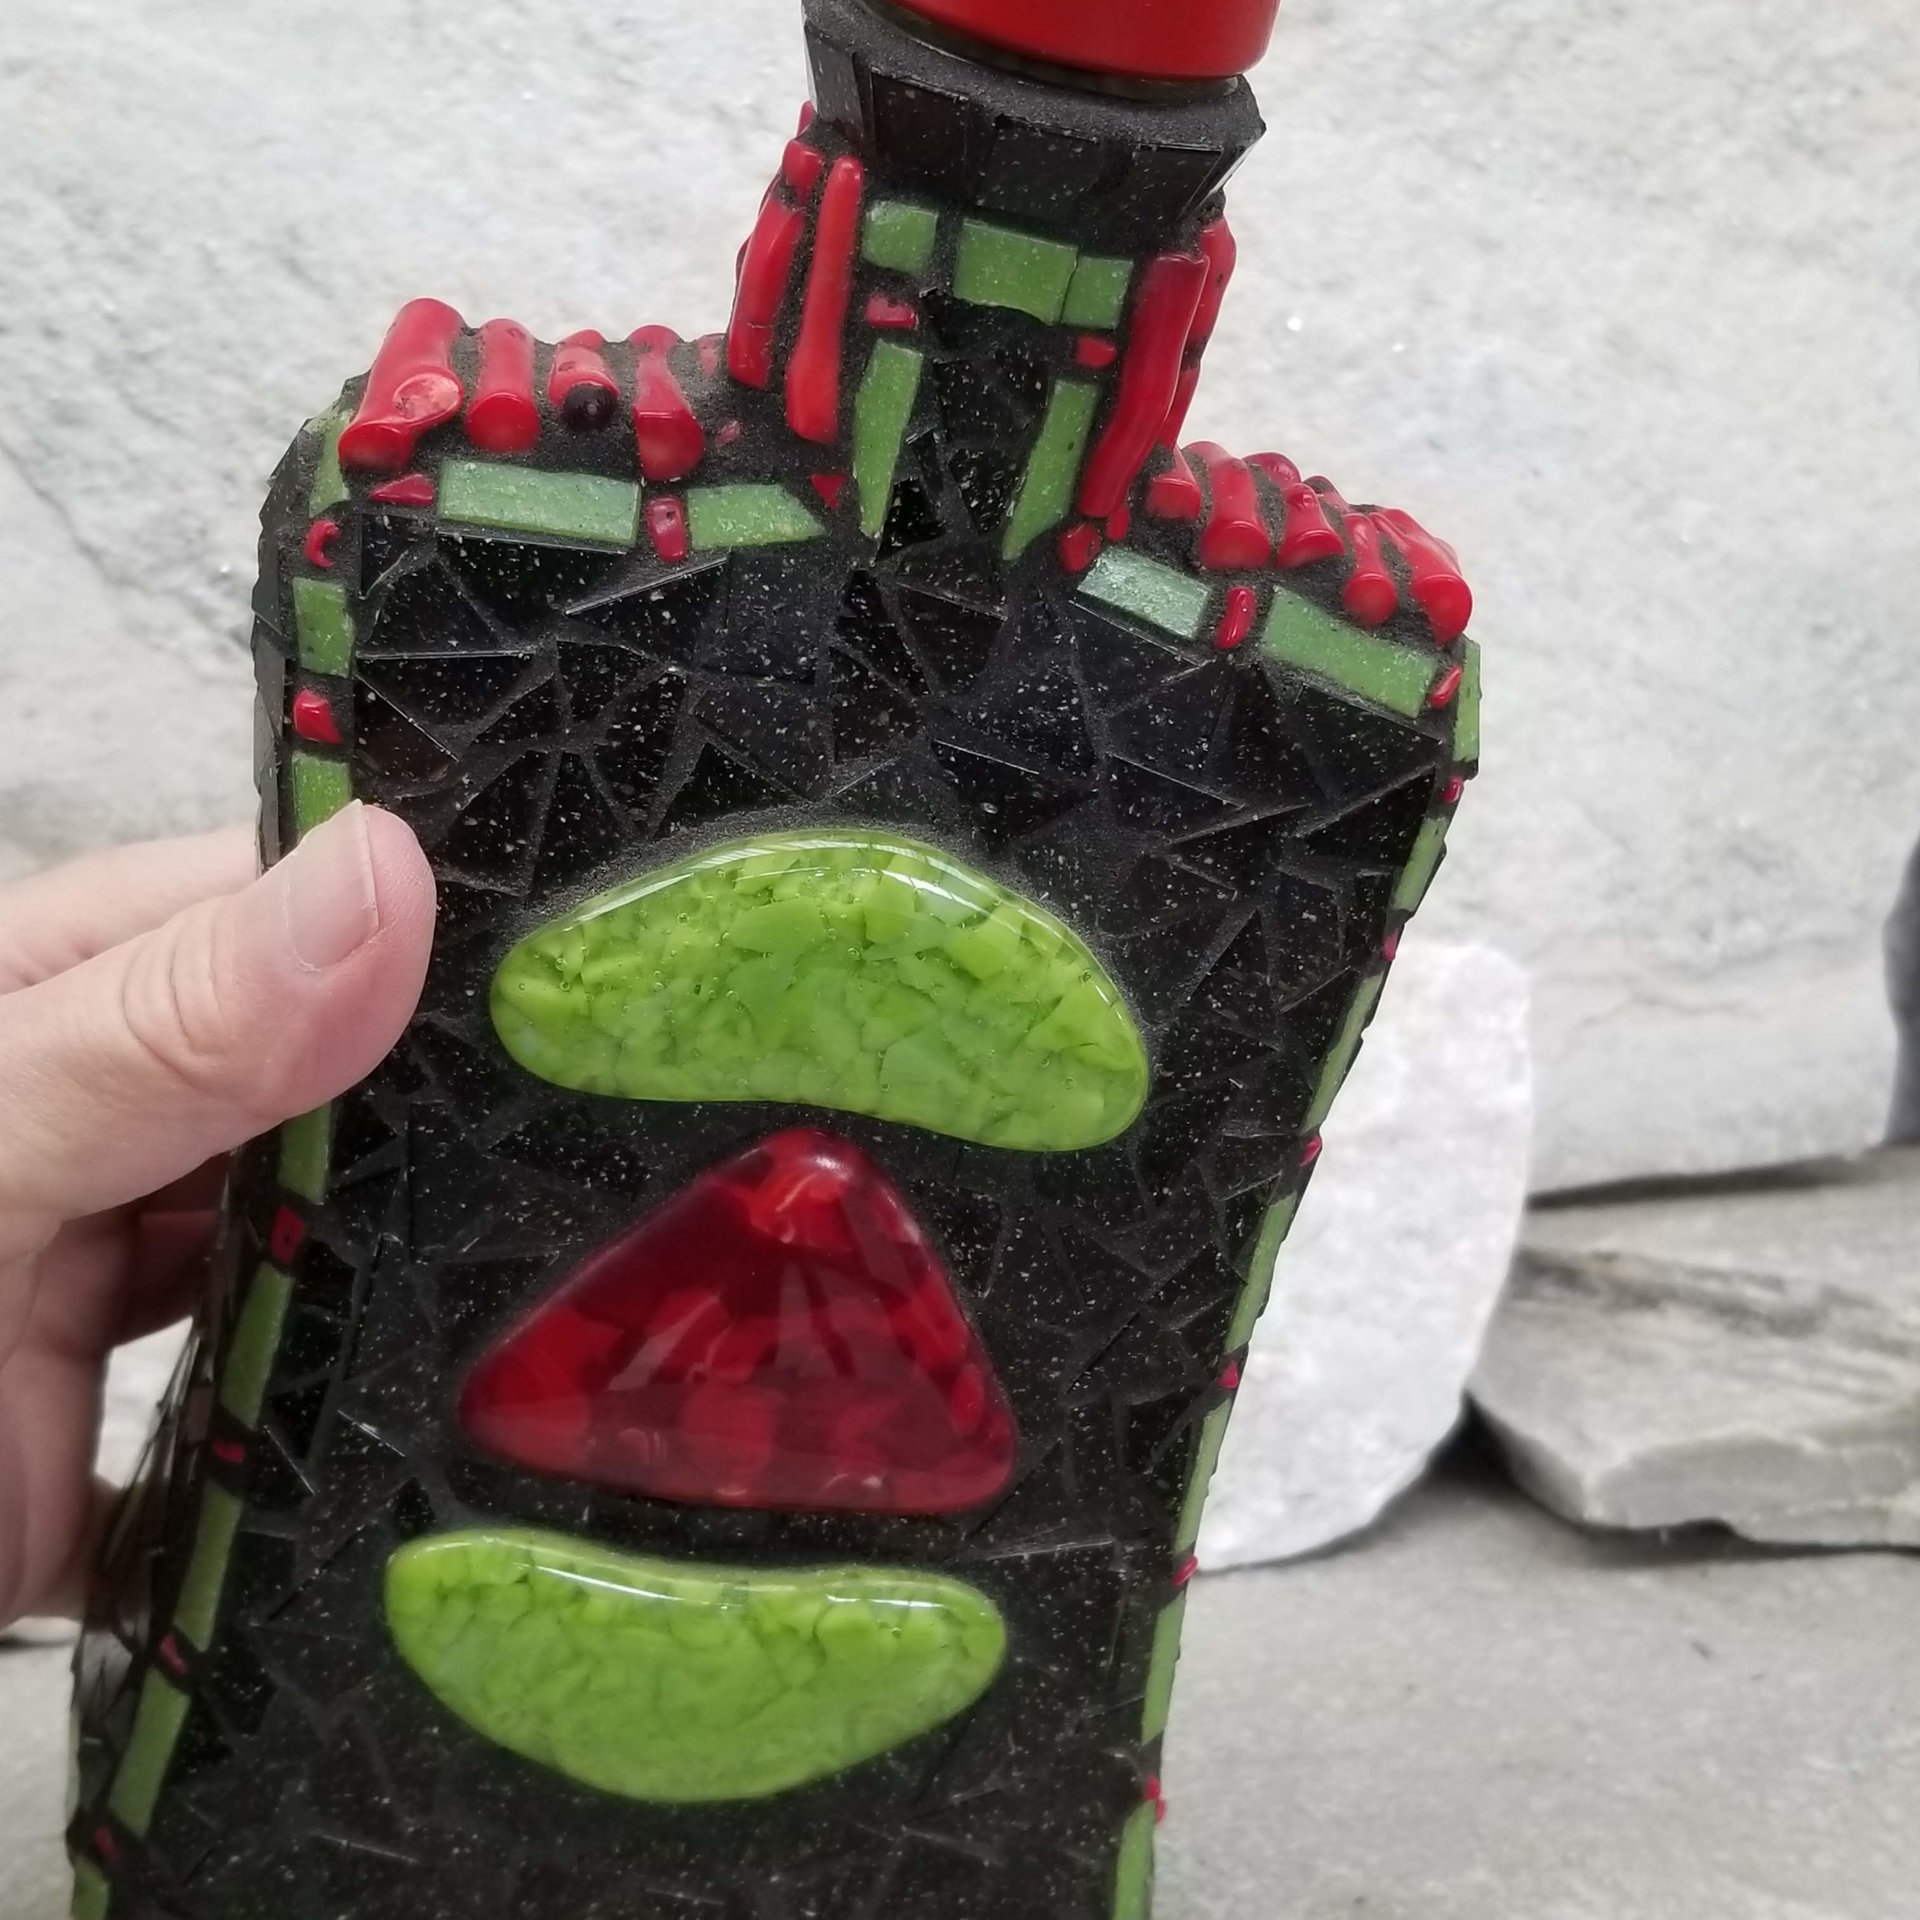 Mosaic Liquor Bottle "In Balance” Up-cycled Decanter